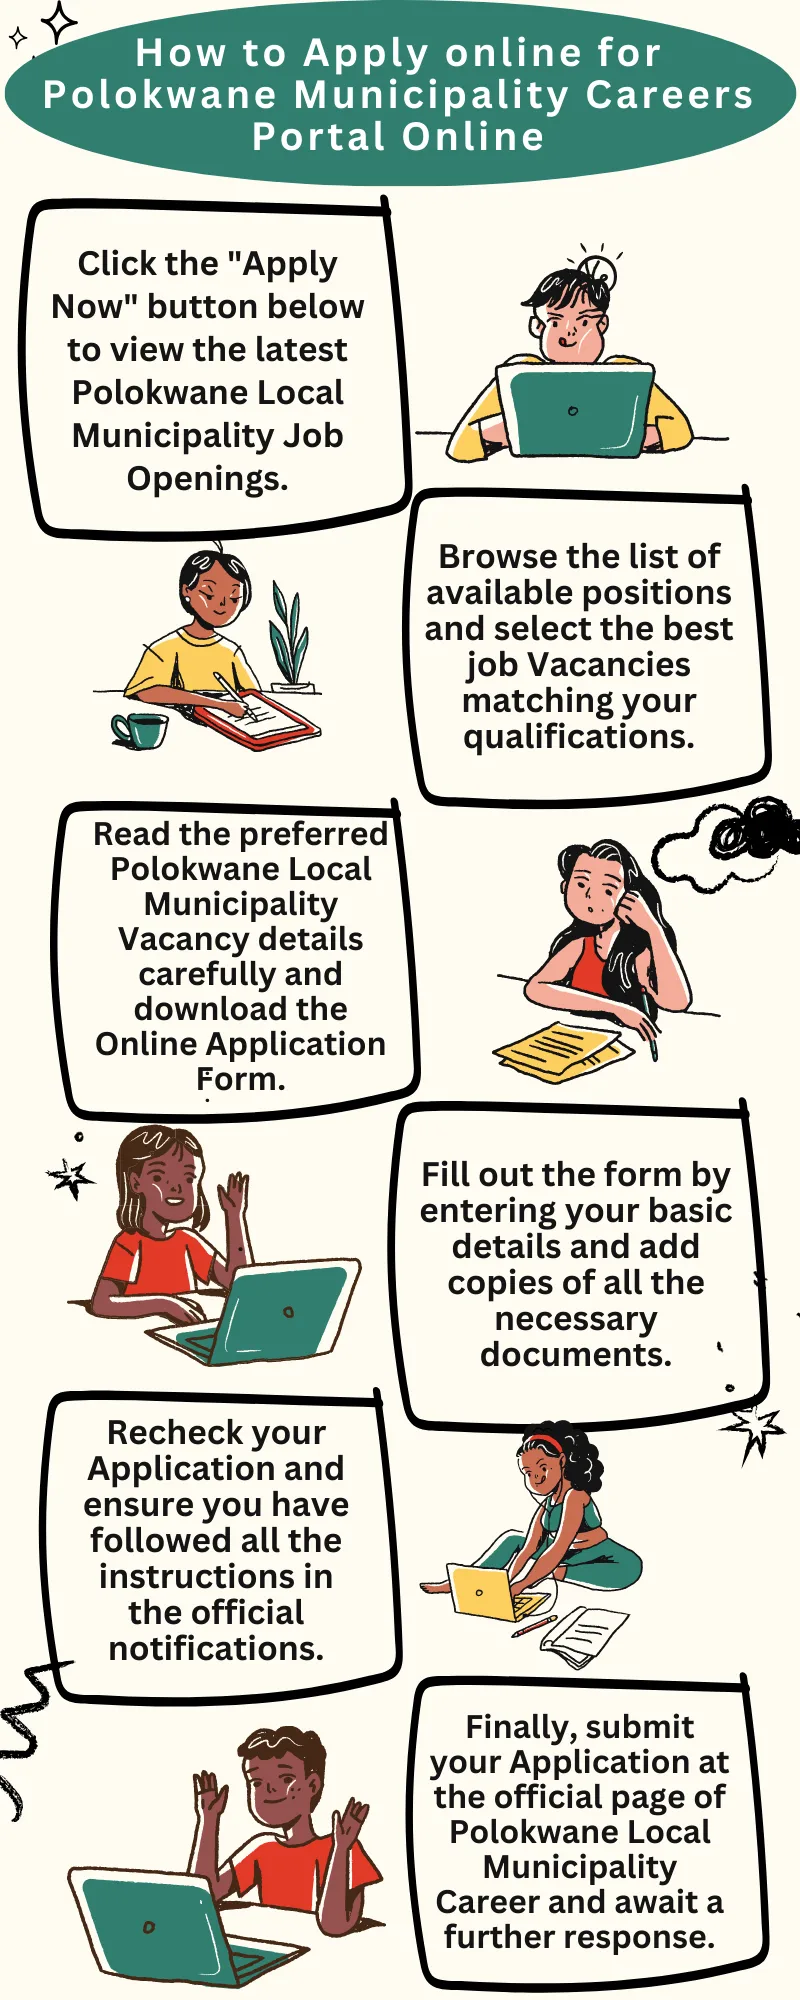 How to Apply online for Polokwane Municipality Careers Portal Online